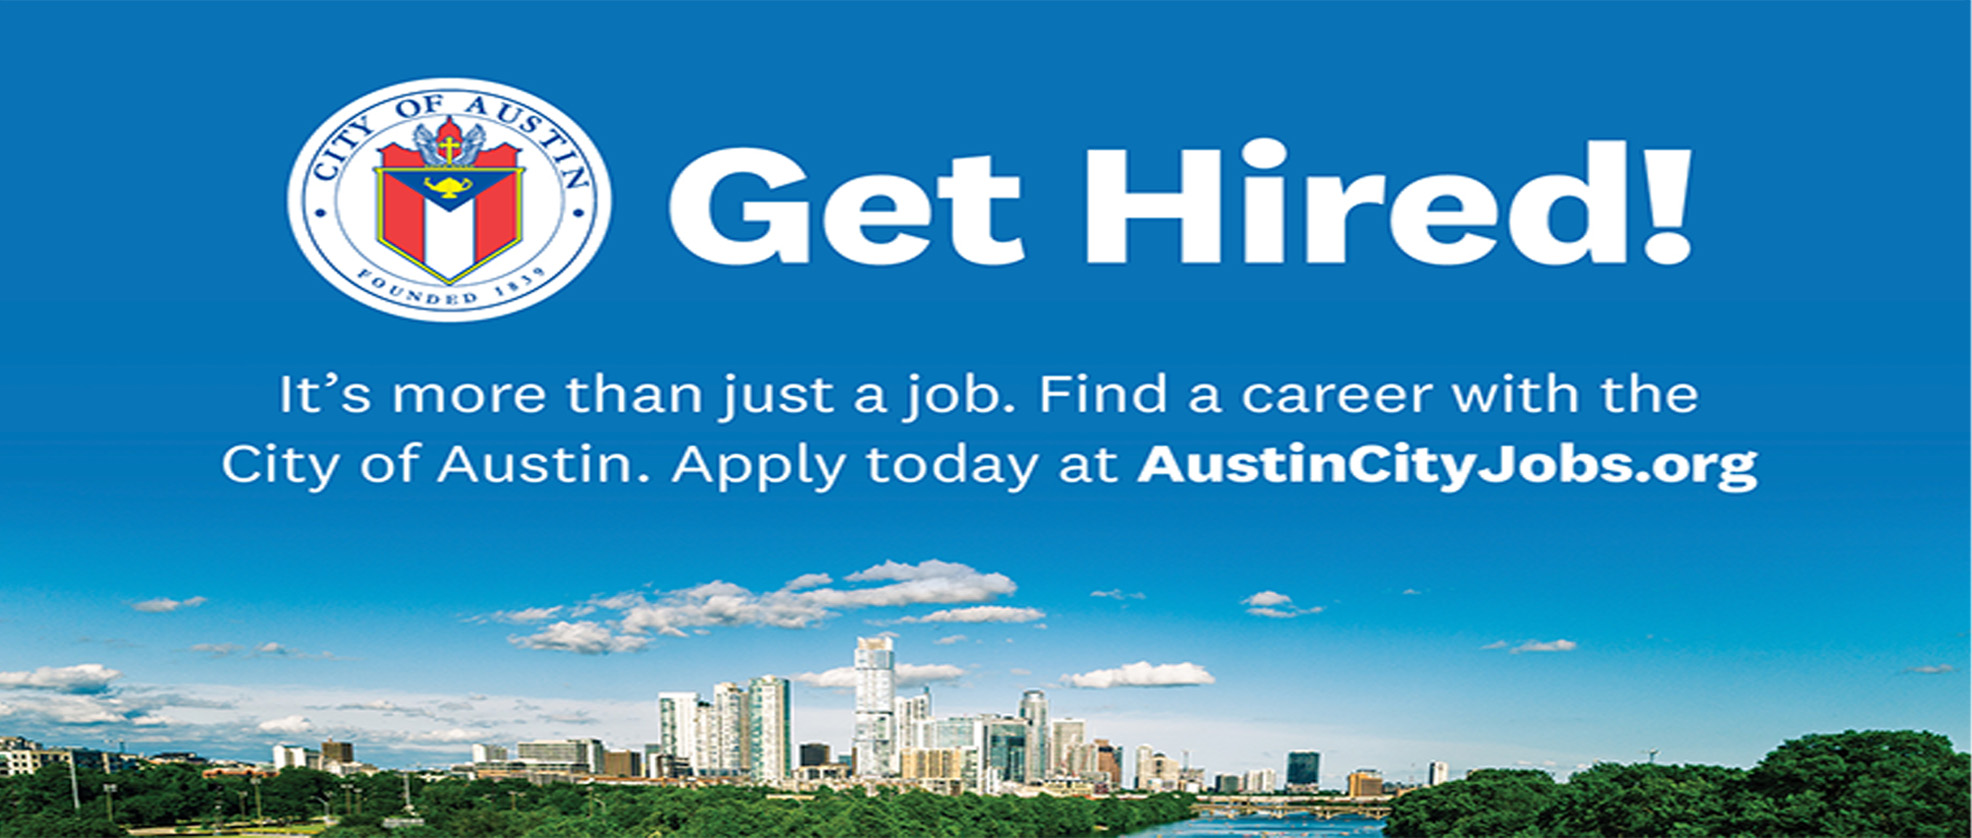 City of Austin Get Hired